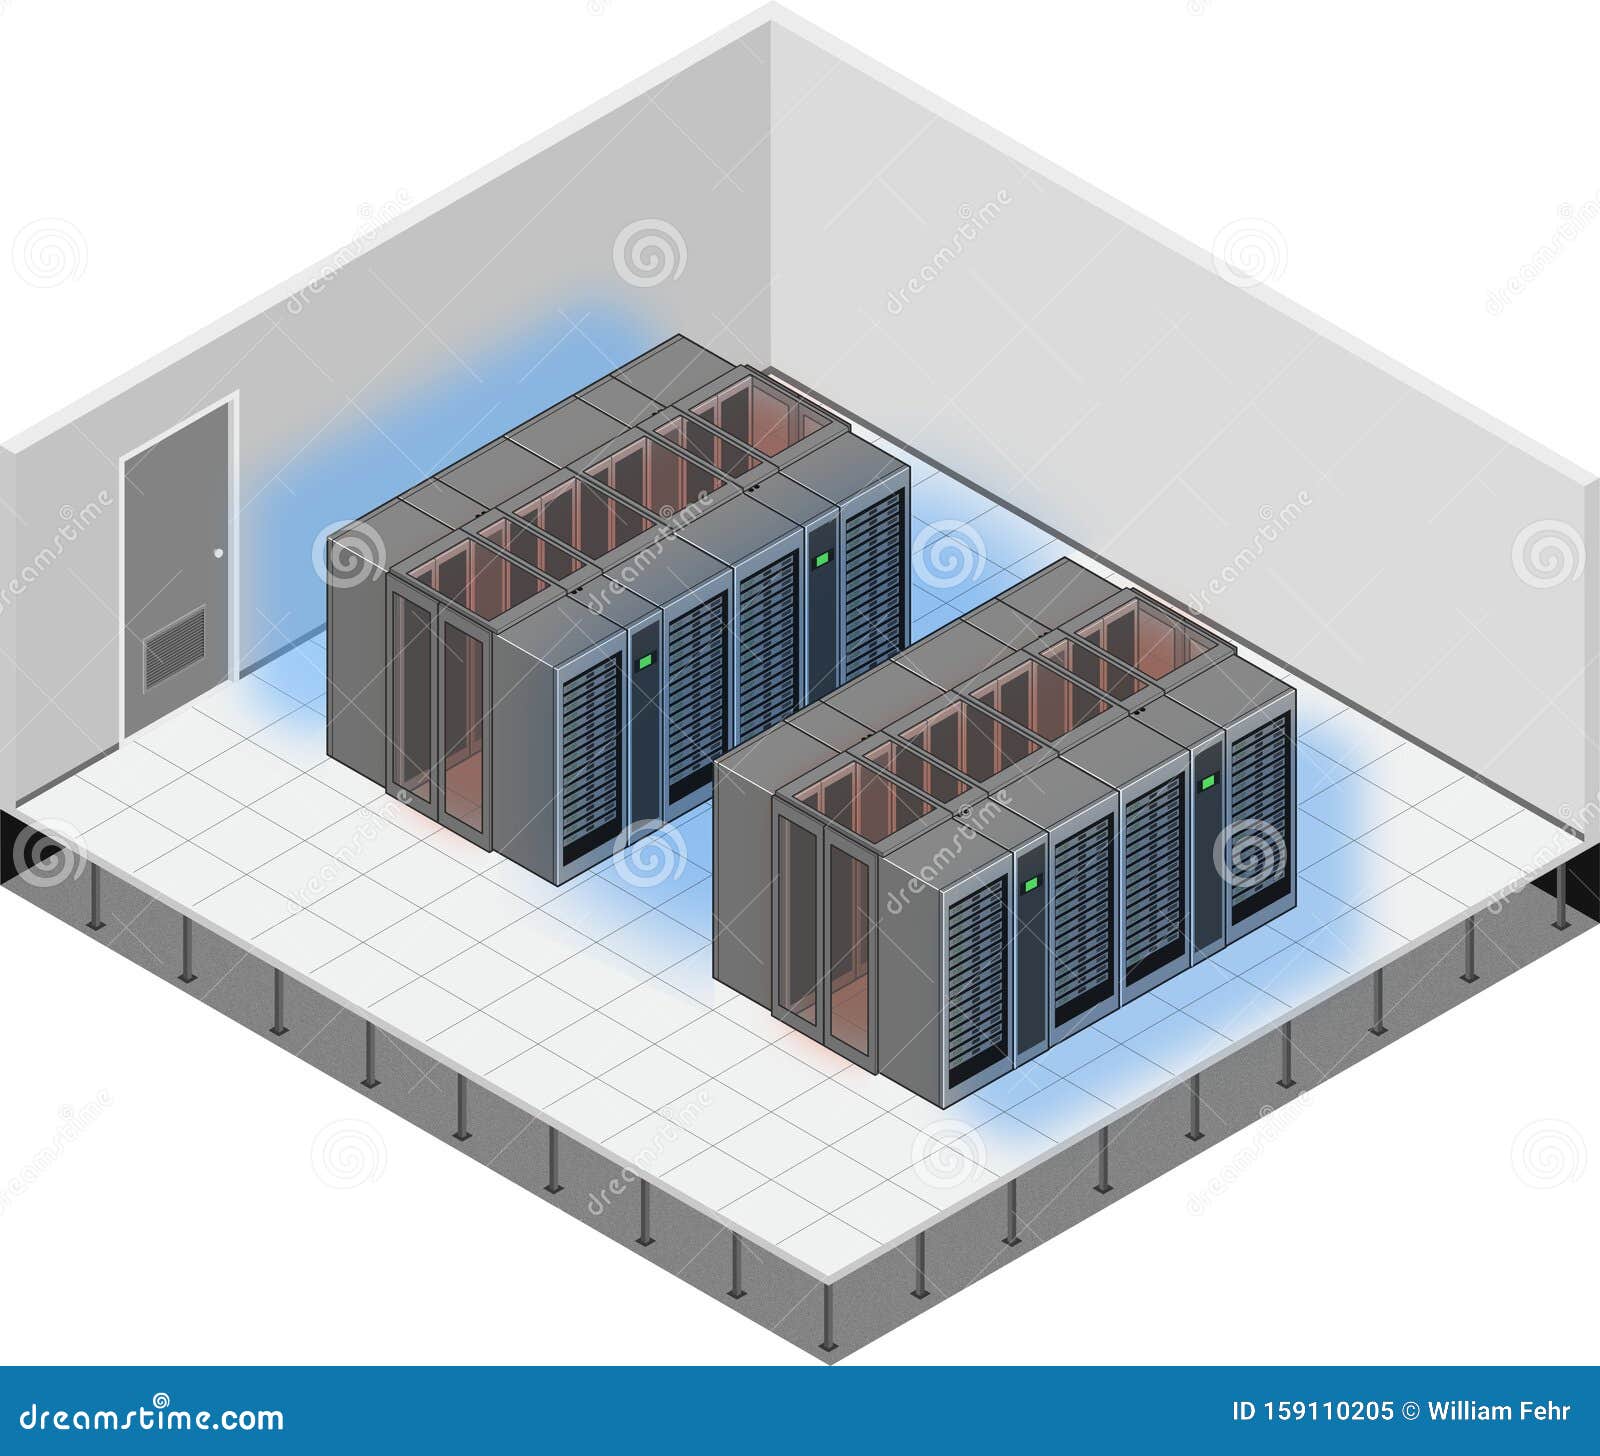  of a hot aisle containment in a data center.